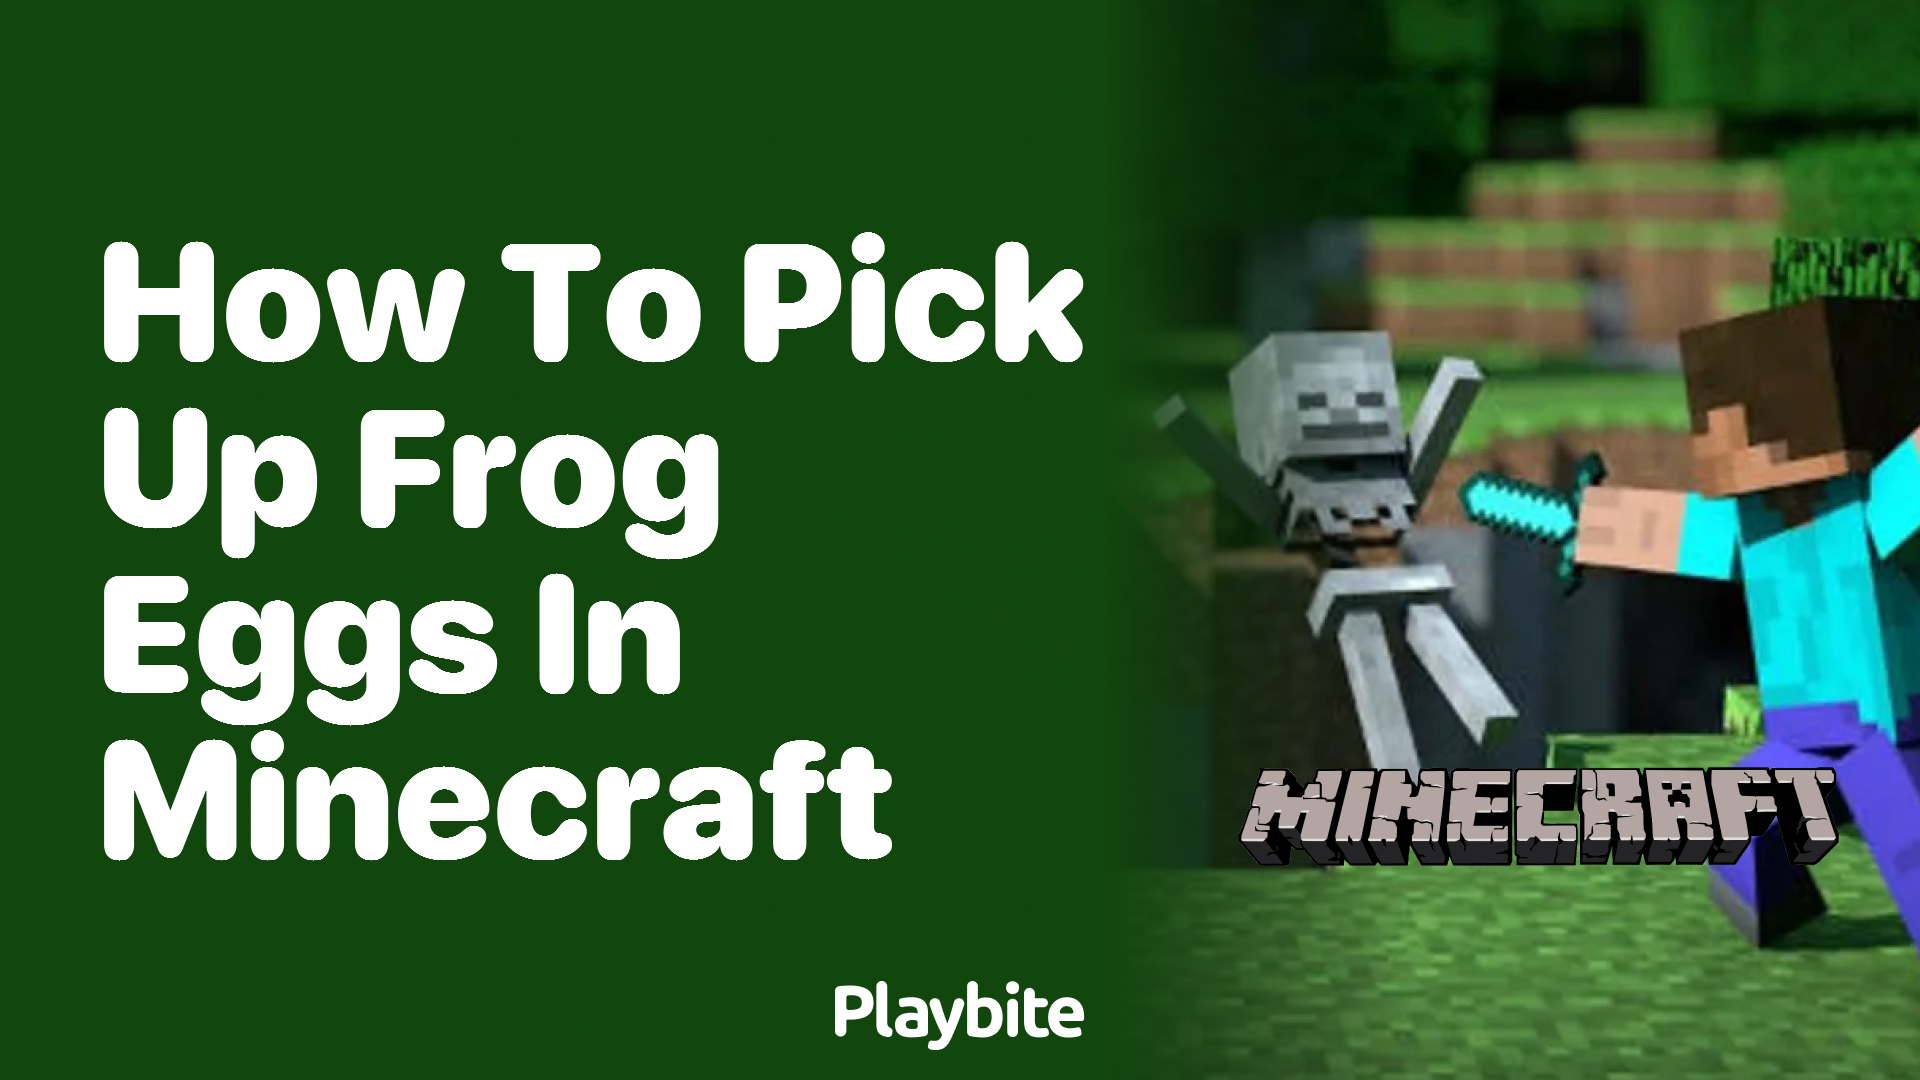 How to Pick Up Frog Eggs in Minecraft - Playbite